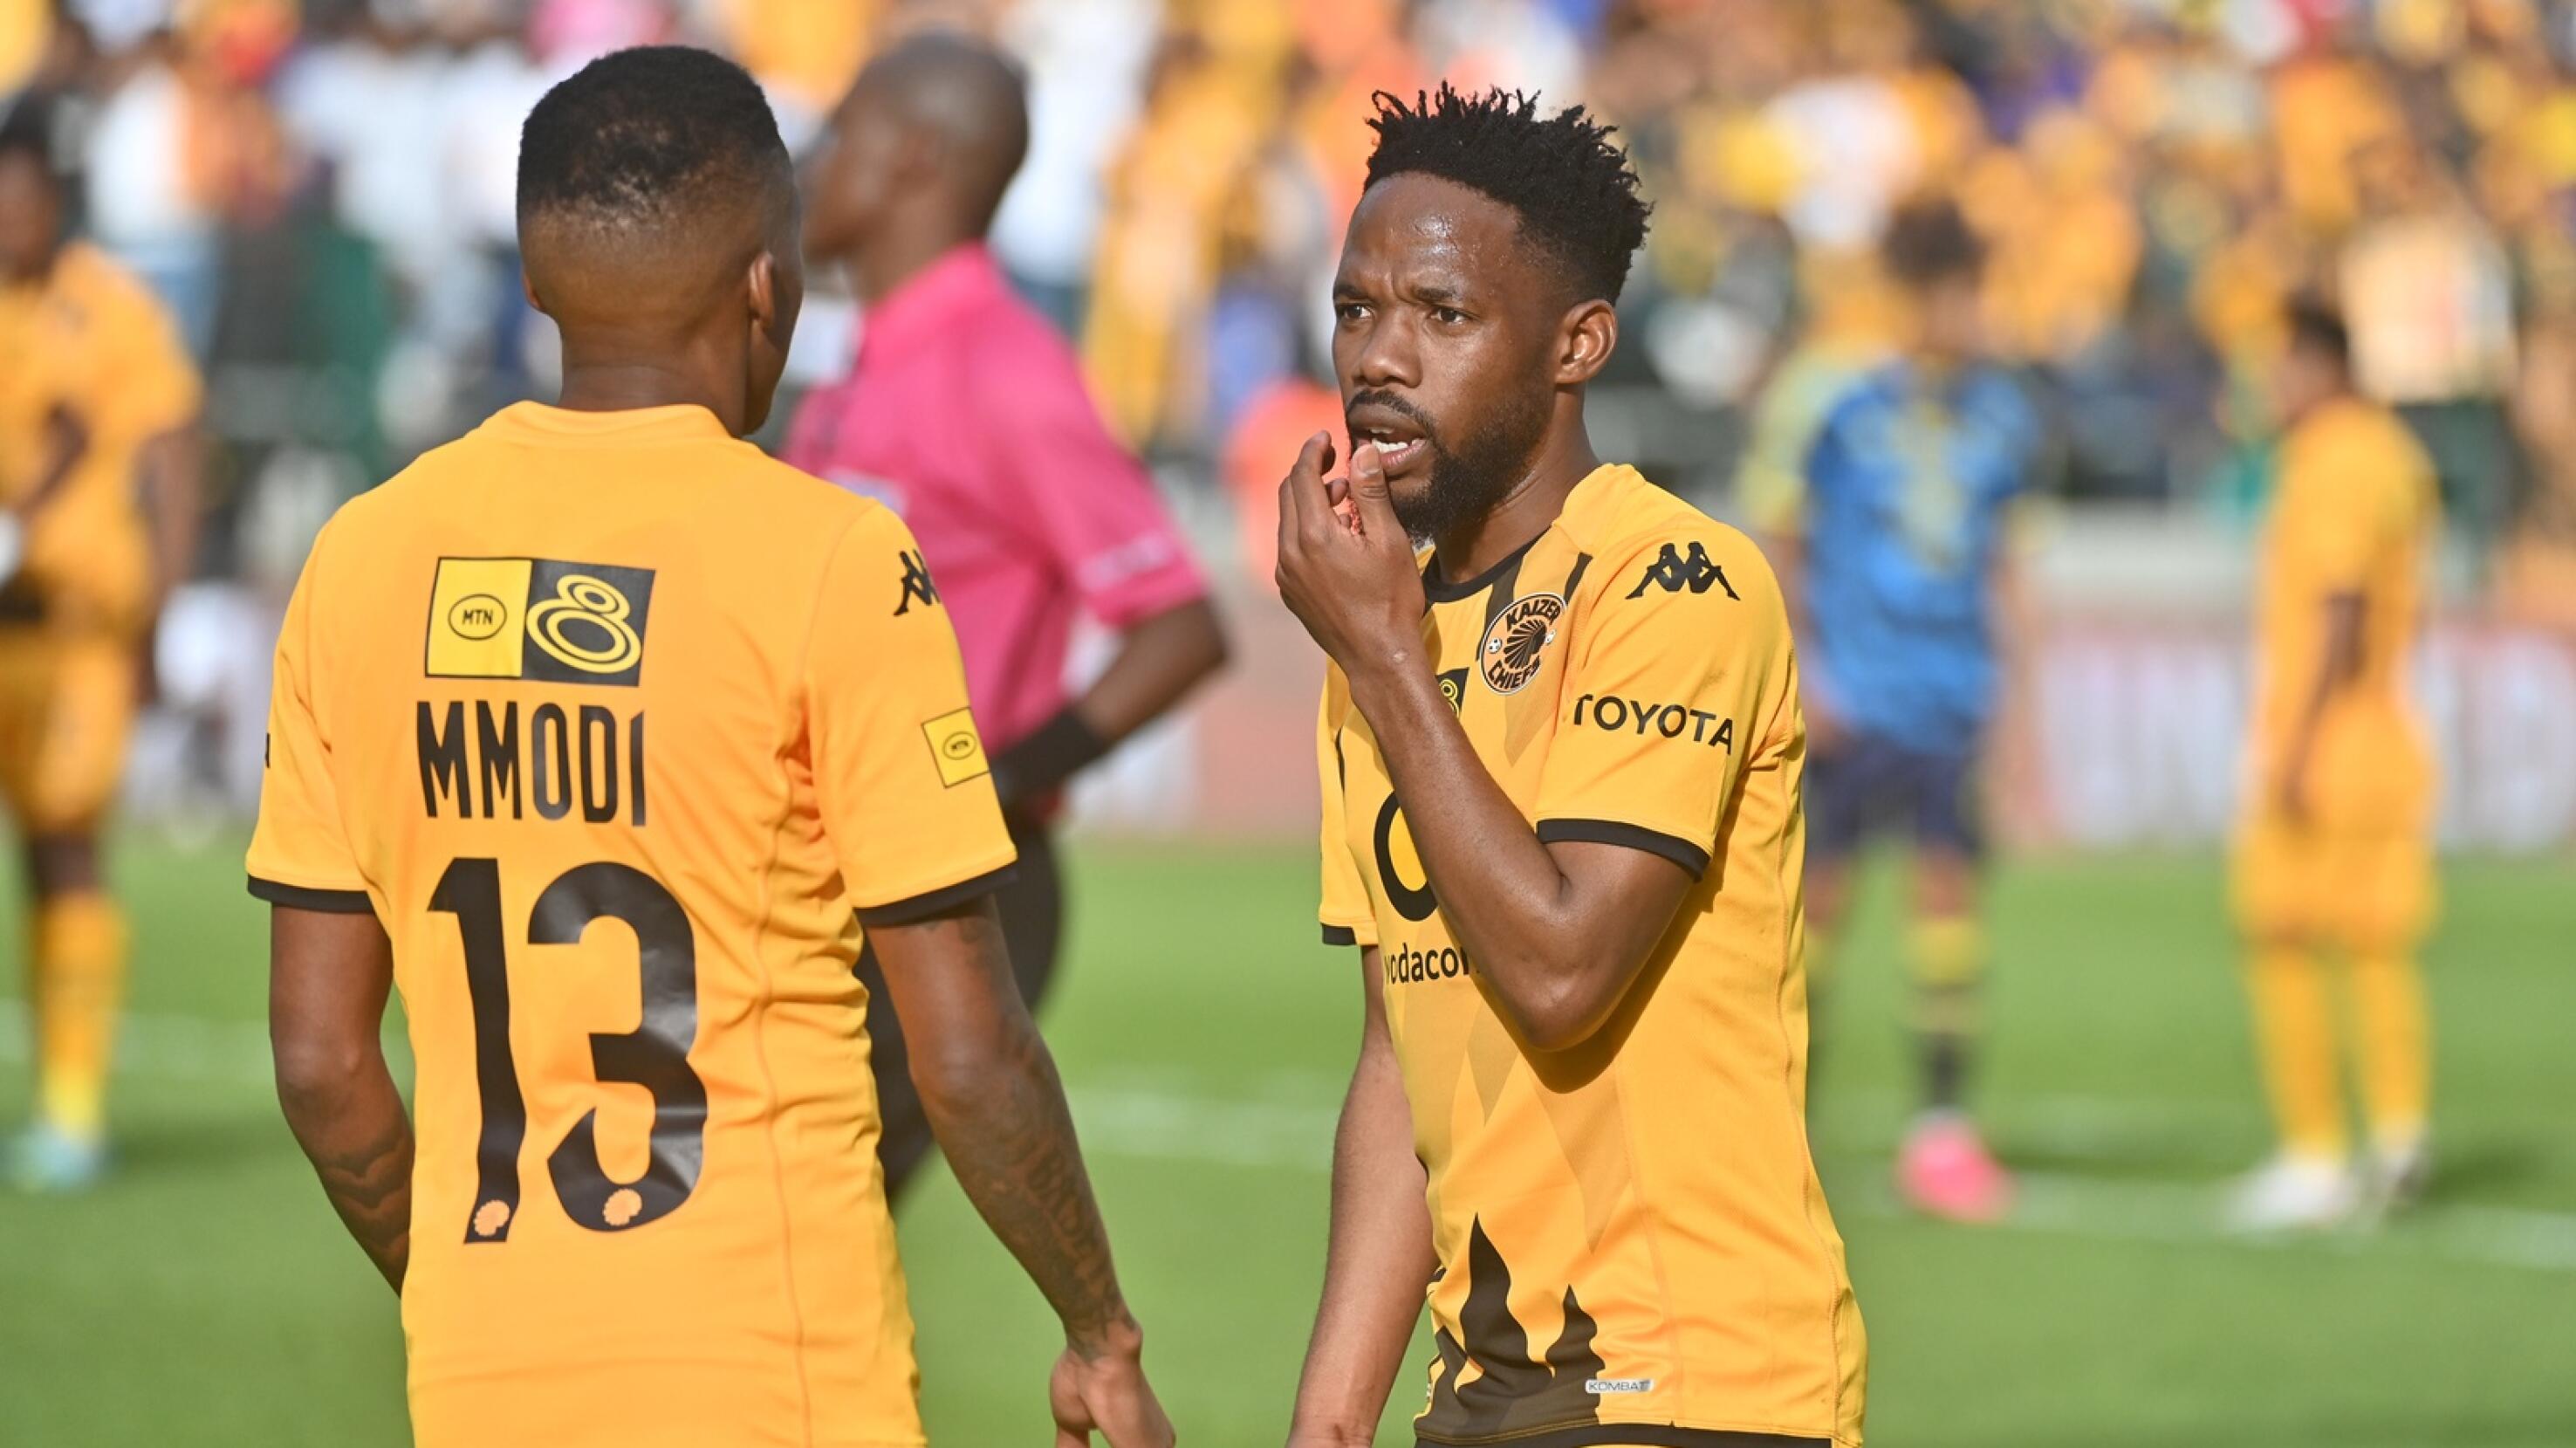 Pule Mmodi and Mduduzi Mdantsane in action for Kaizer Chiefs